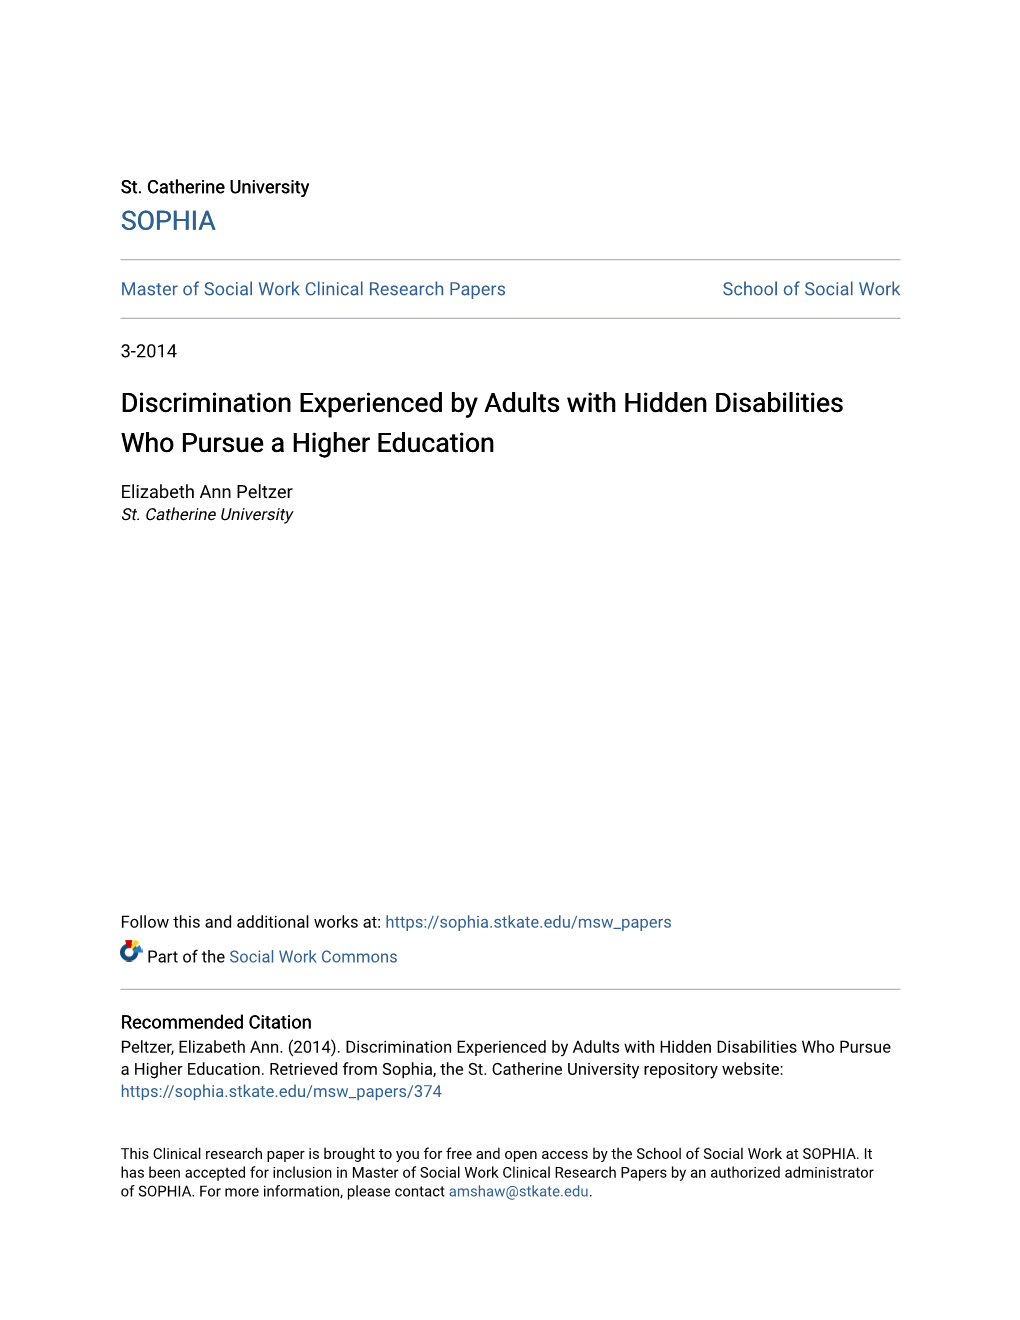 Discrimination Experienced by Adults with Hidden Disabilities Who Pursue a Higher Education